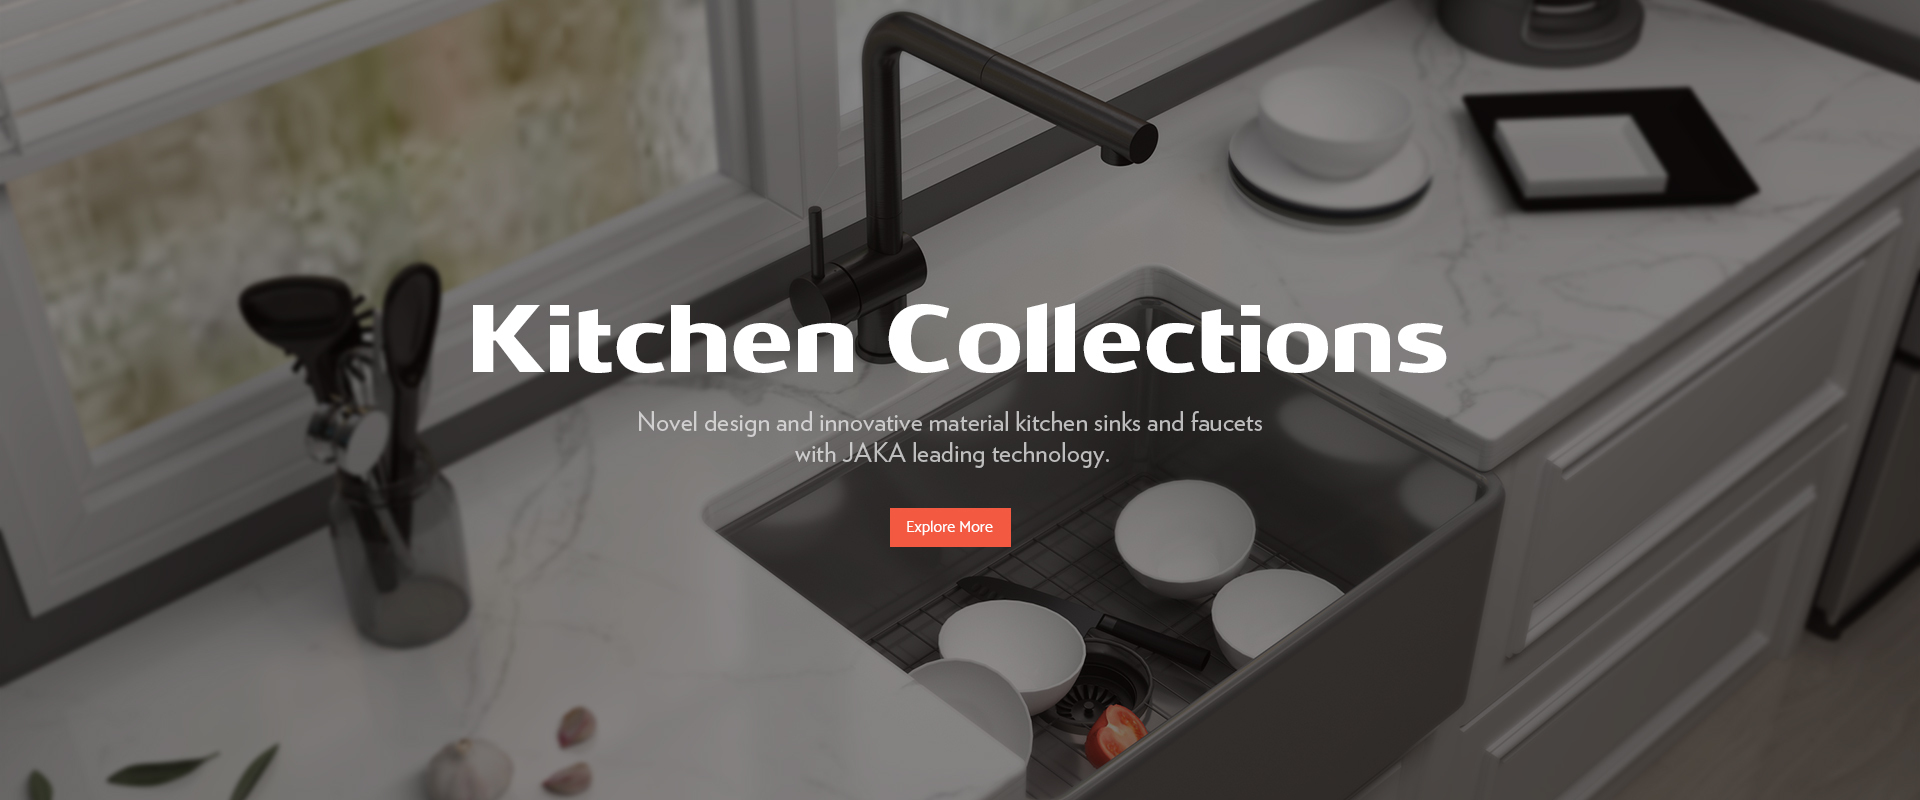 Kitchen Collections